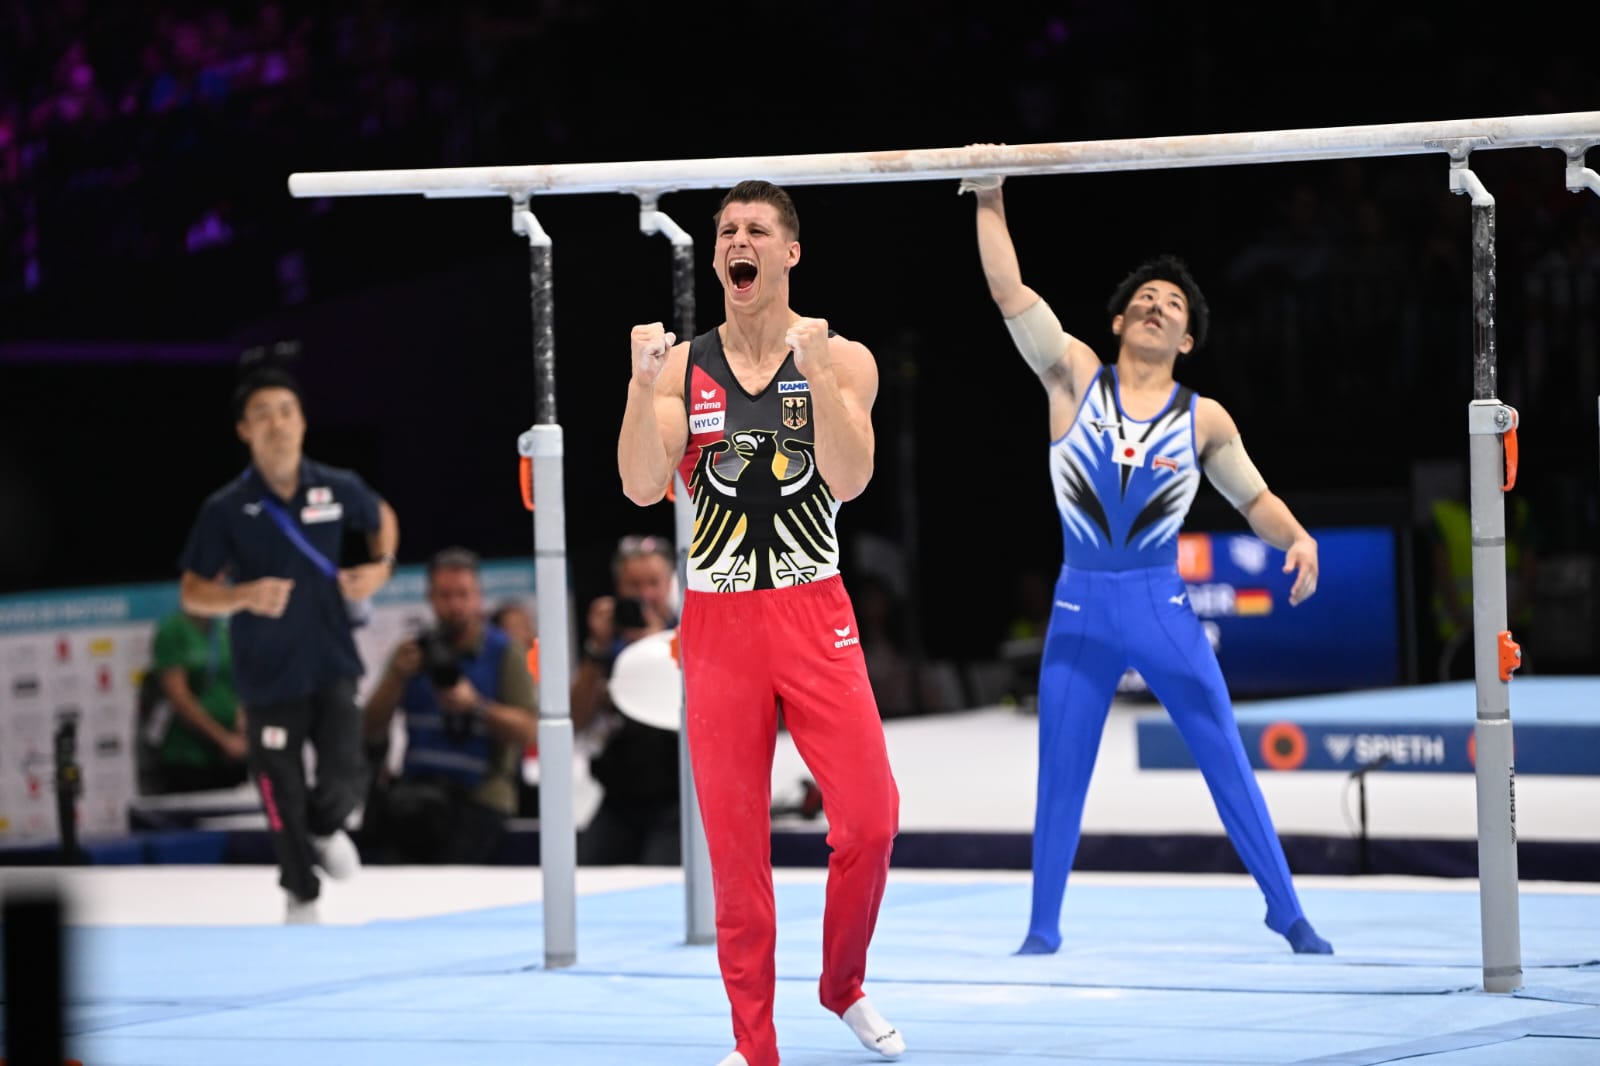 Lukas Dauser (GER) reacts after dismounting during the parallel bars final at the 2023 World Artistic Gymnastics Championships.